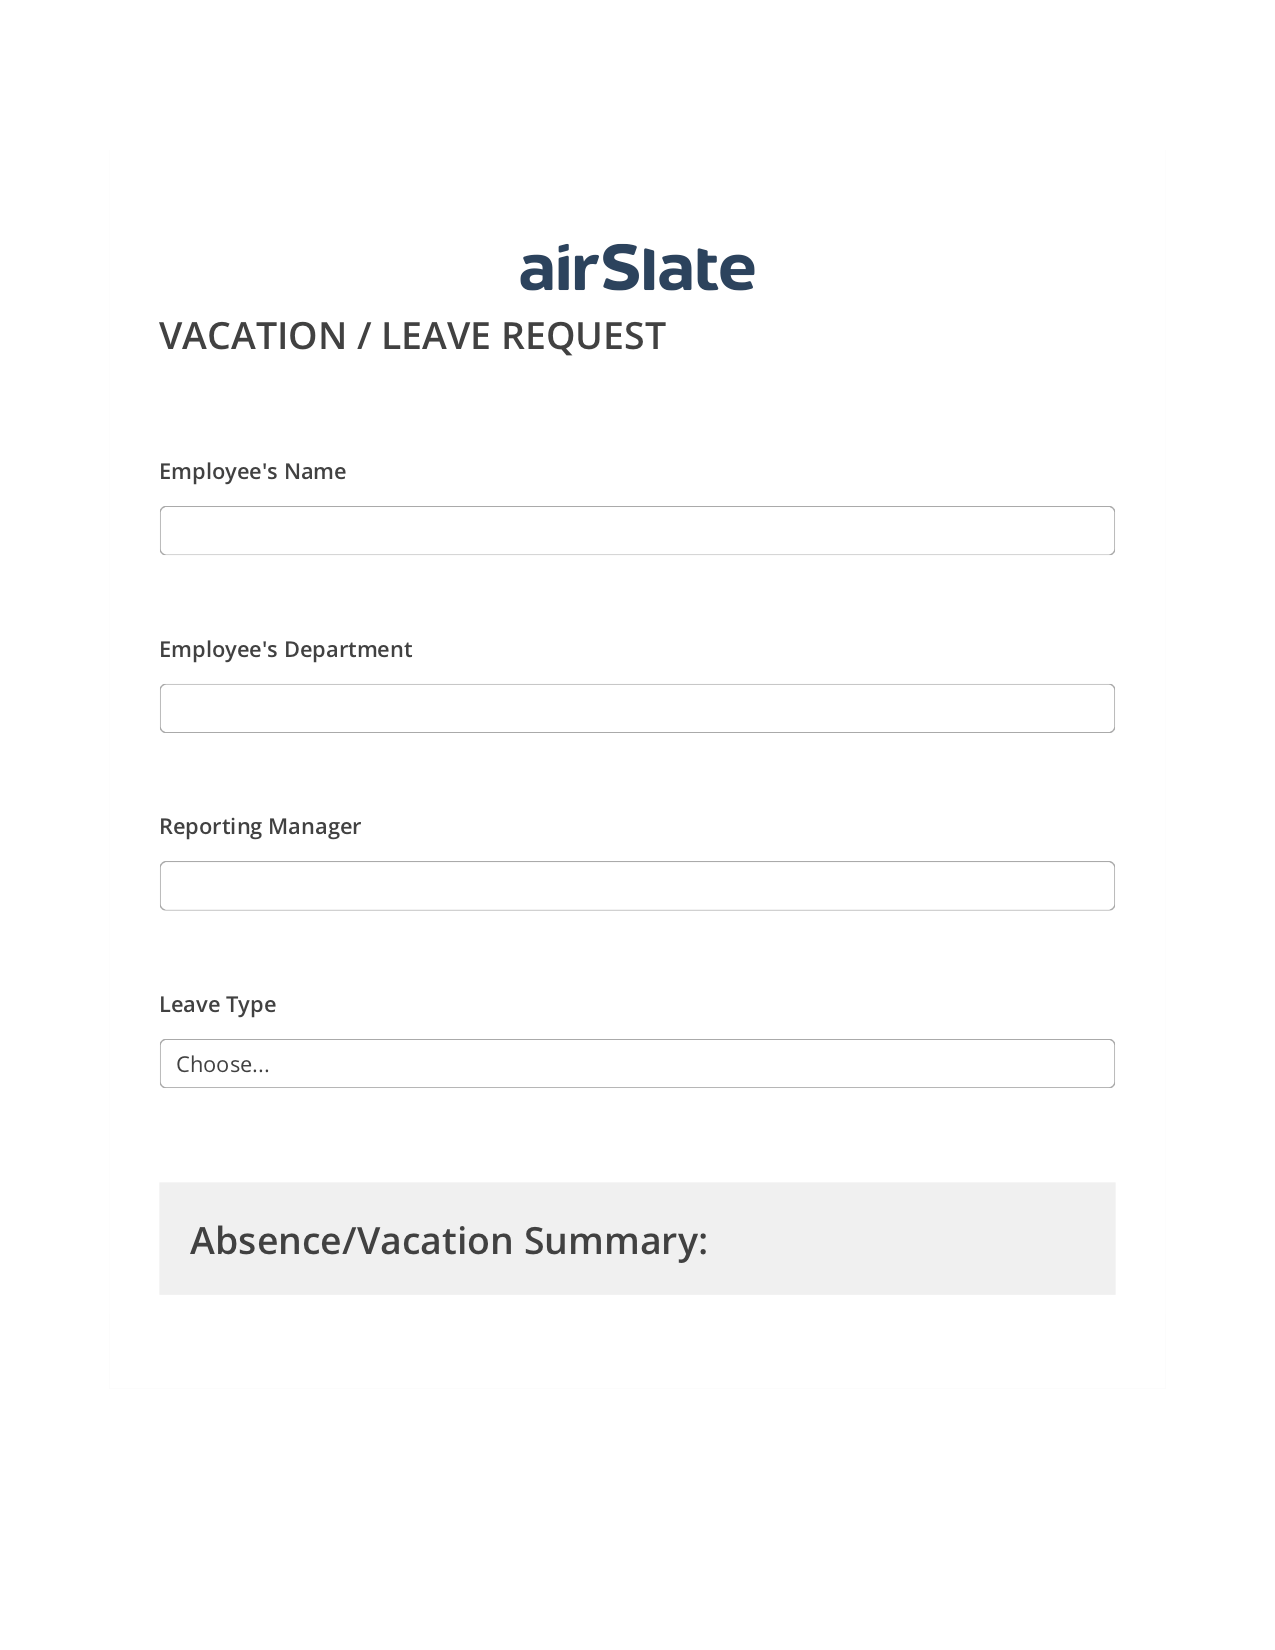 Vacation/Leave Request Workflow Pre-fill from Smartsheet Bot, System Bot - Create a Slate in another Flow, Export to Smartsheet